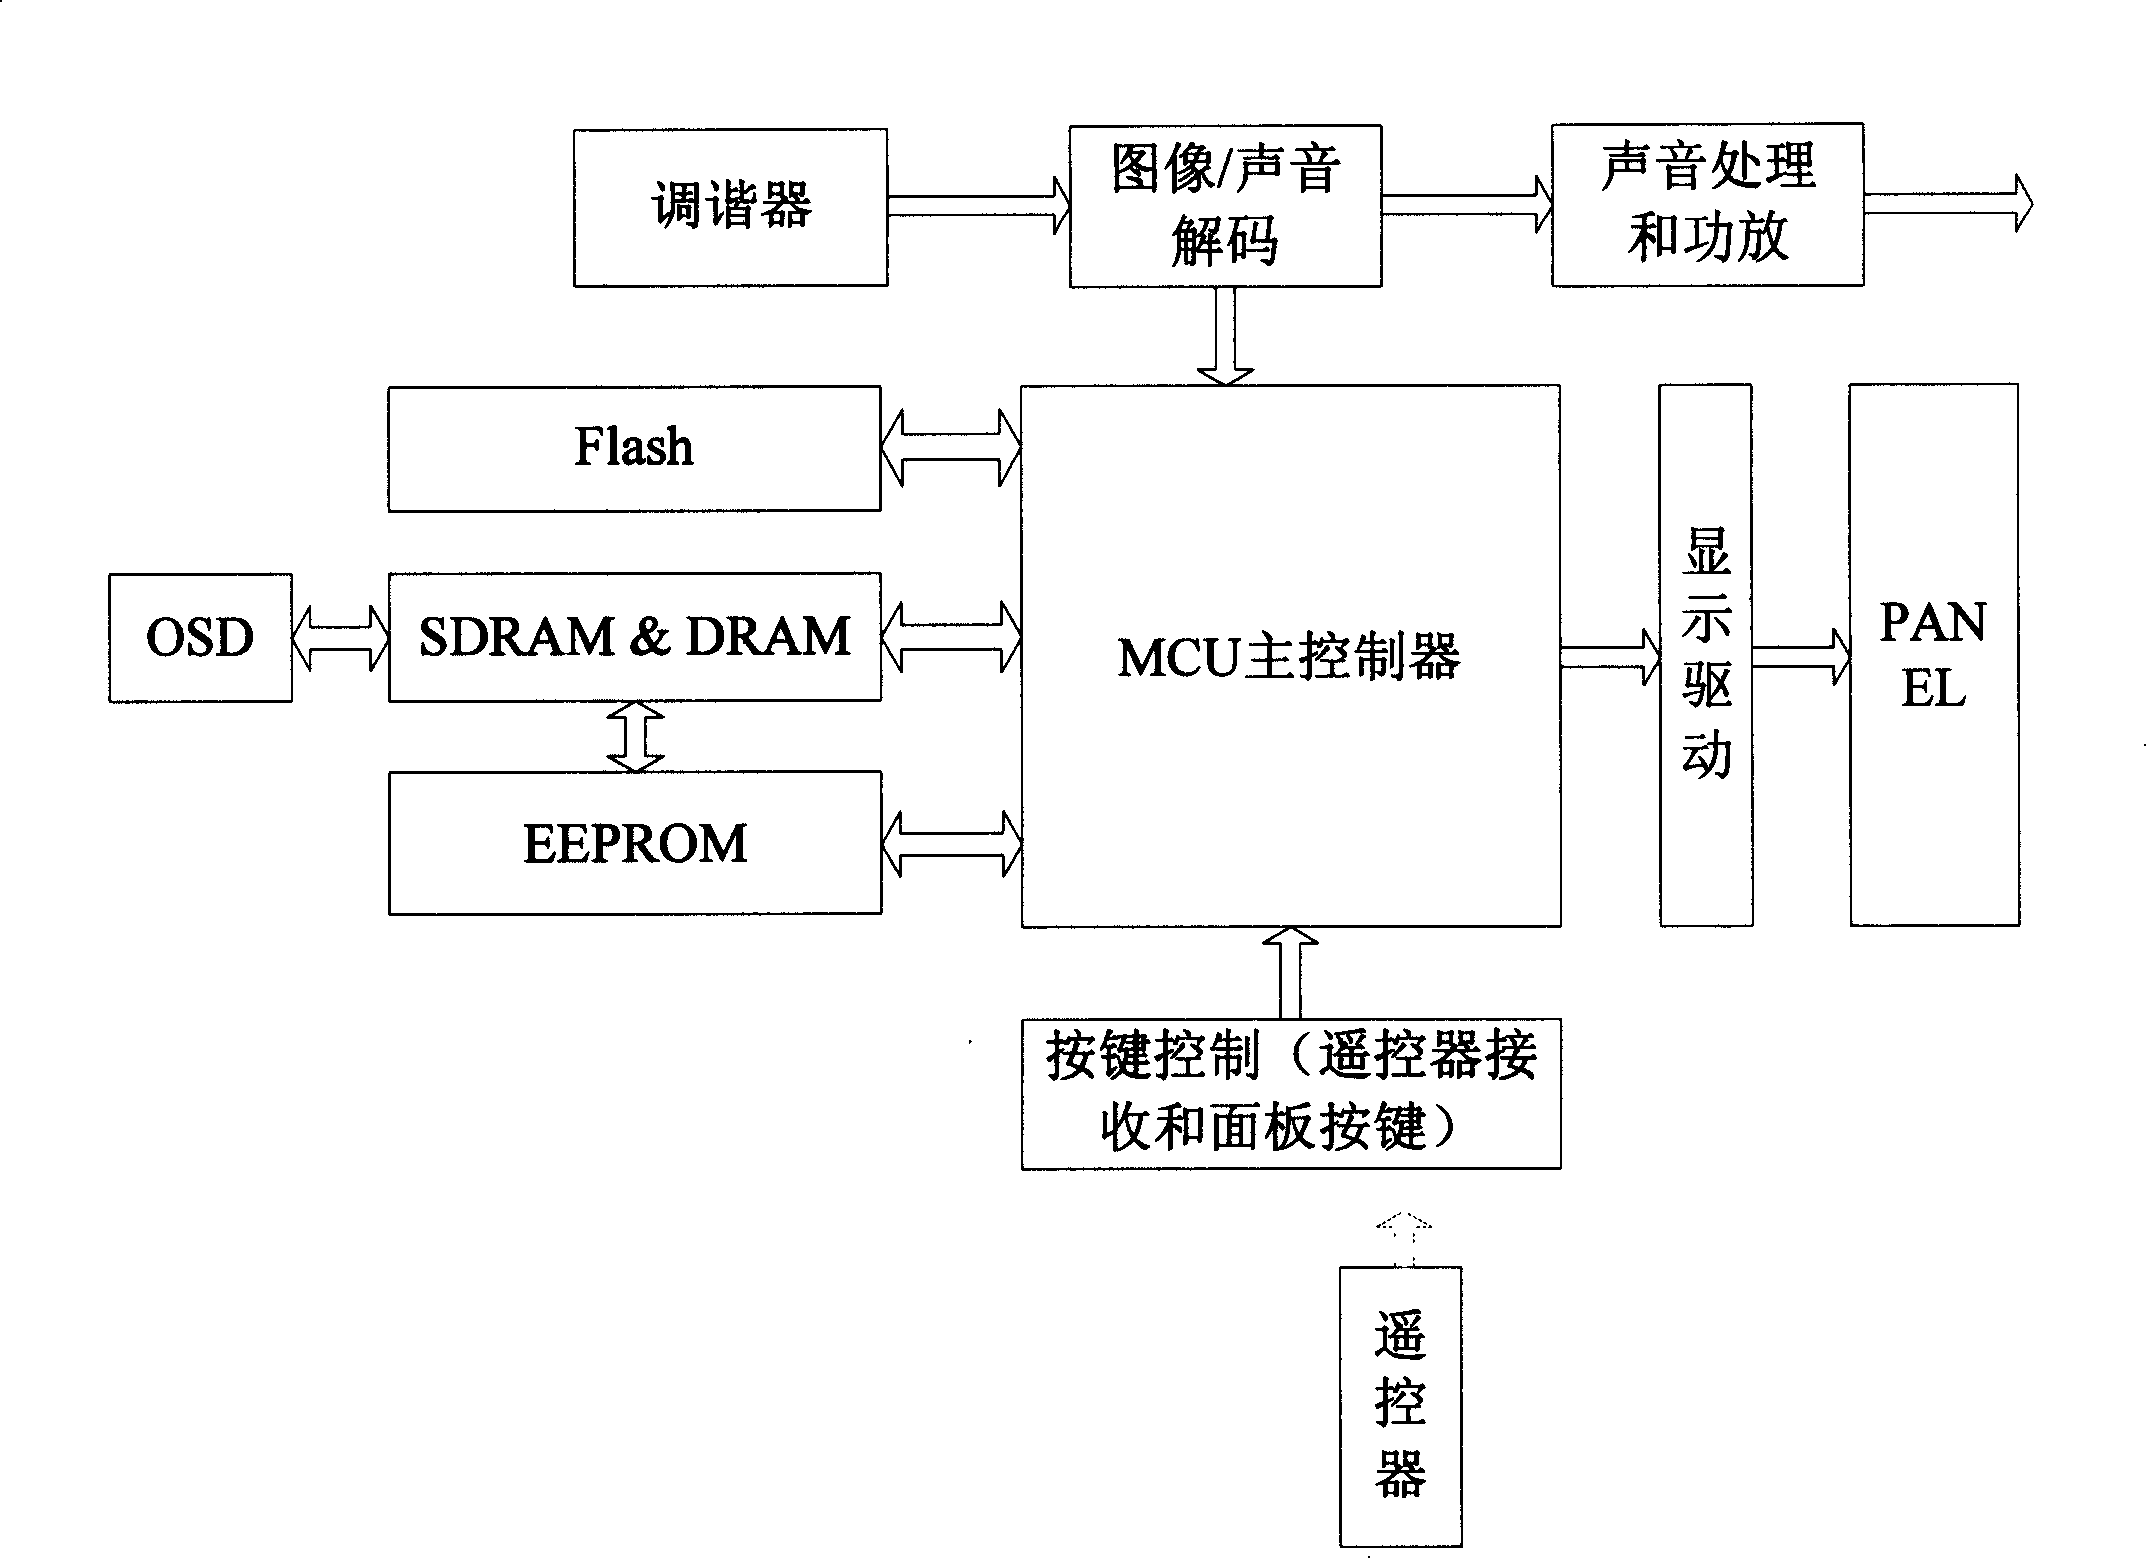 Method and system for self-defining remote controller key function